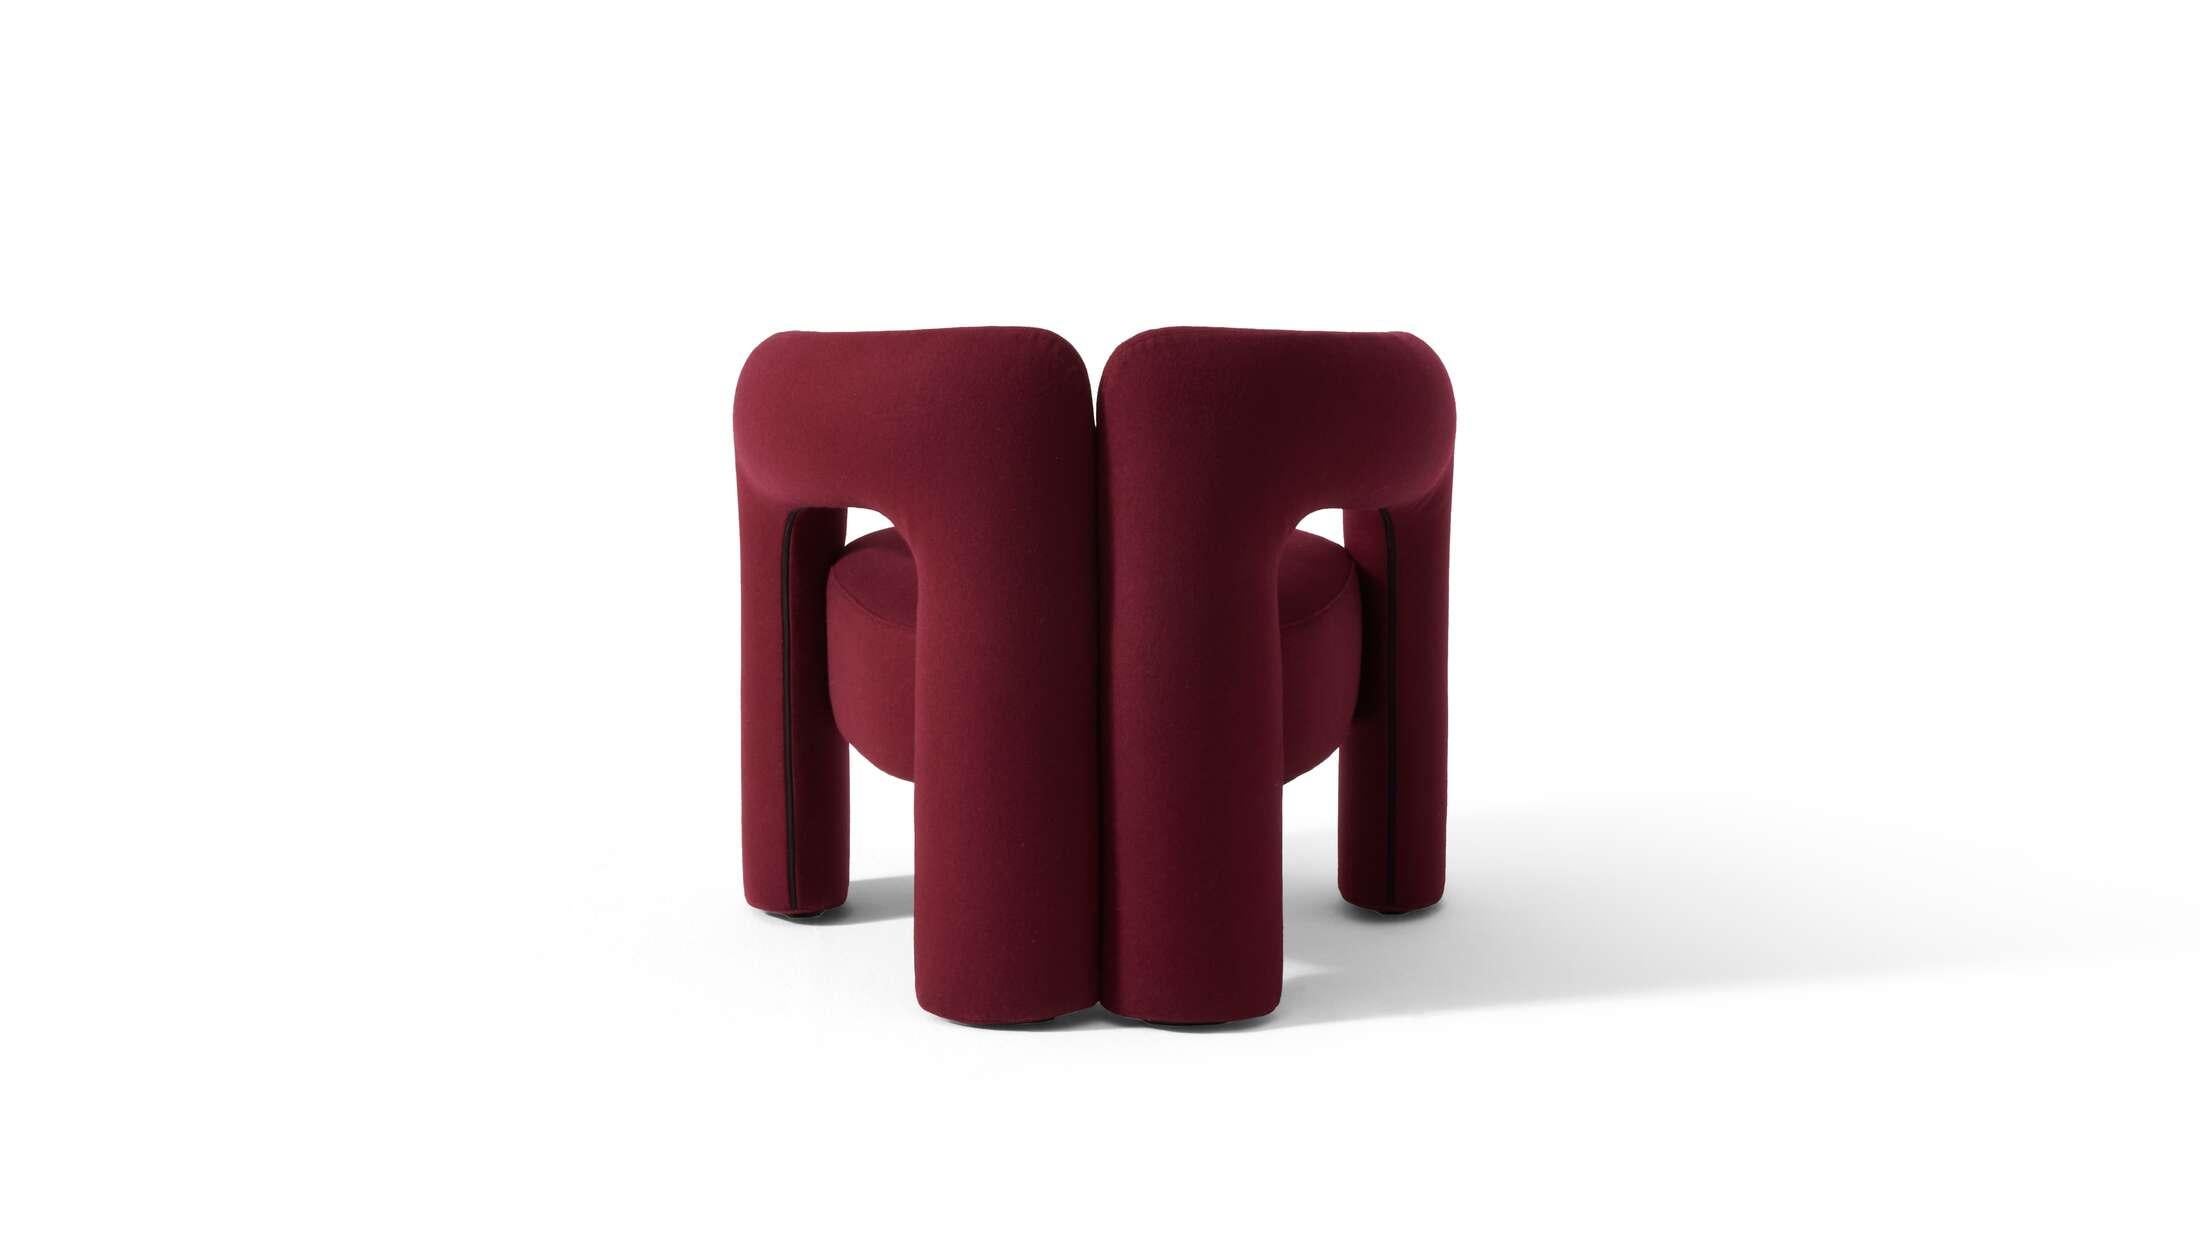 Patricia Urquiola Dudet Armchair
Manufactured by Cassina

INVITATION TO COMFORT

An armchair with sinuous curves, envisioned as a refuge of relaxation.

The structure, adapted from the chair in the same family designed by Patricia Urquiola, is